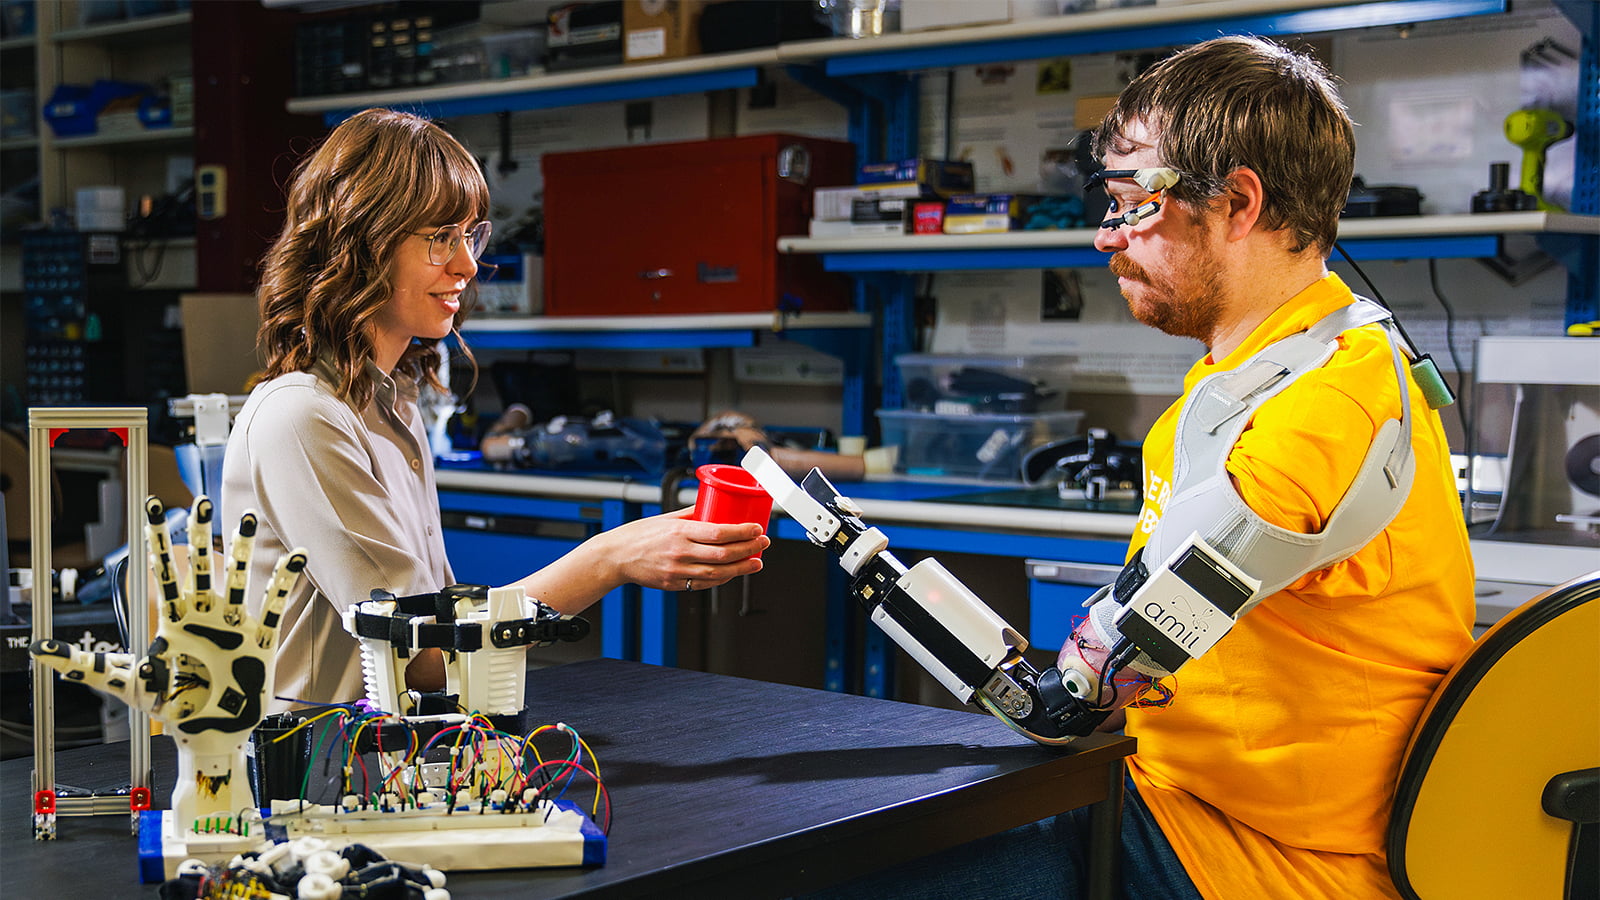 Research associate and biomedical engineering graduate Quinn Boser works with a prosthesis user in the Bionic Limbs for Improved Natural Control (BLINC) laboratory at the University of Alberta.